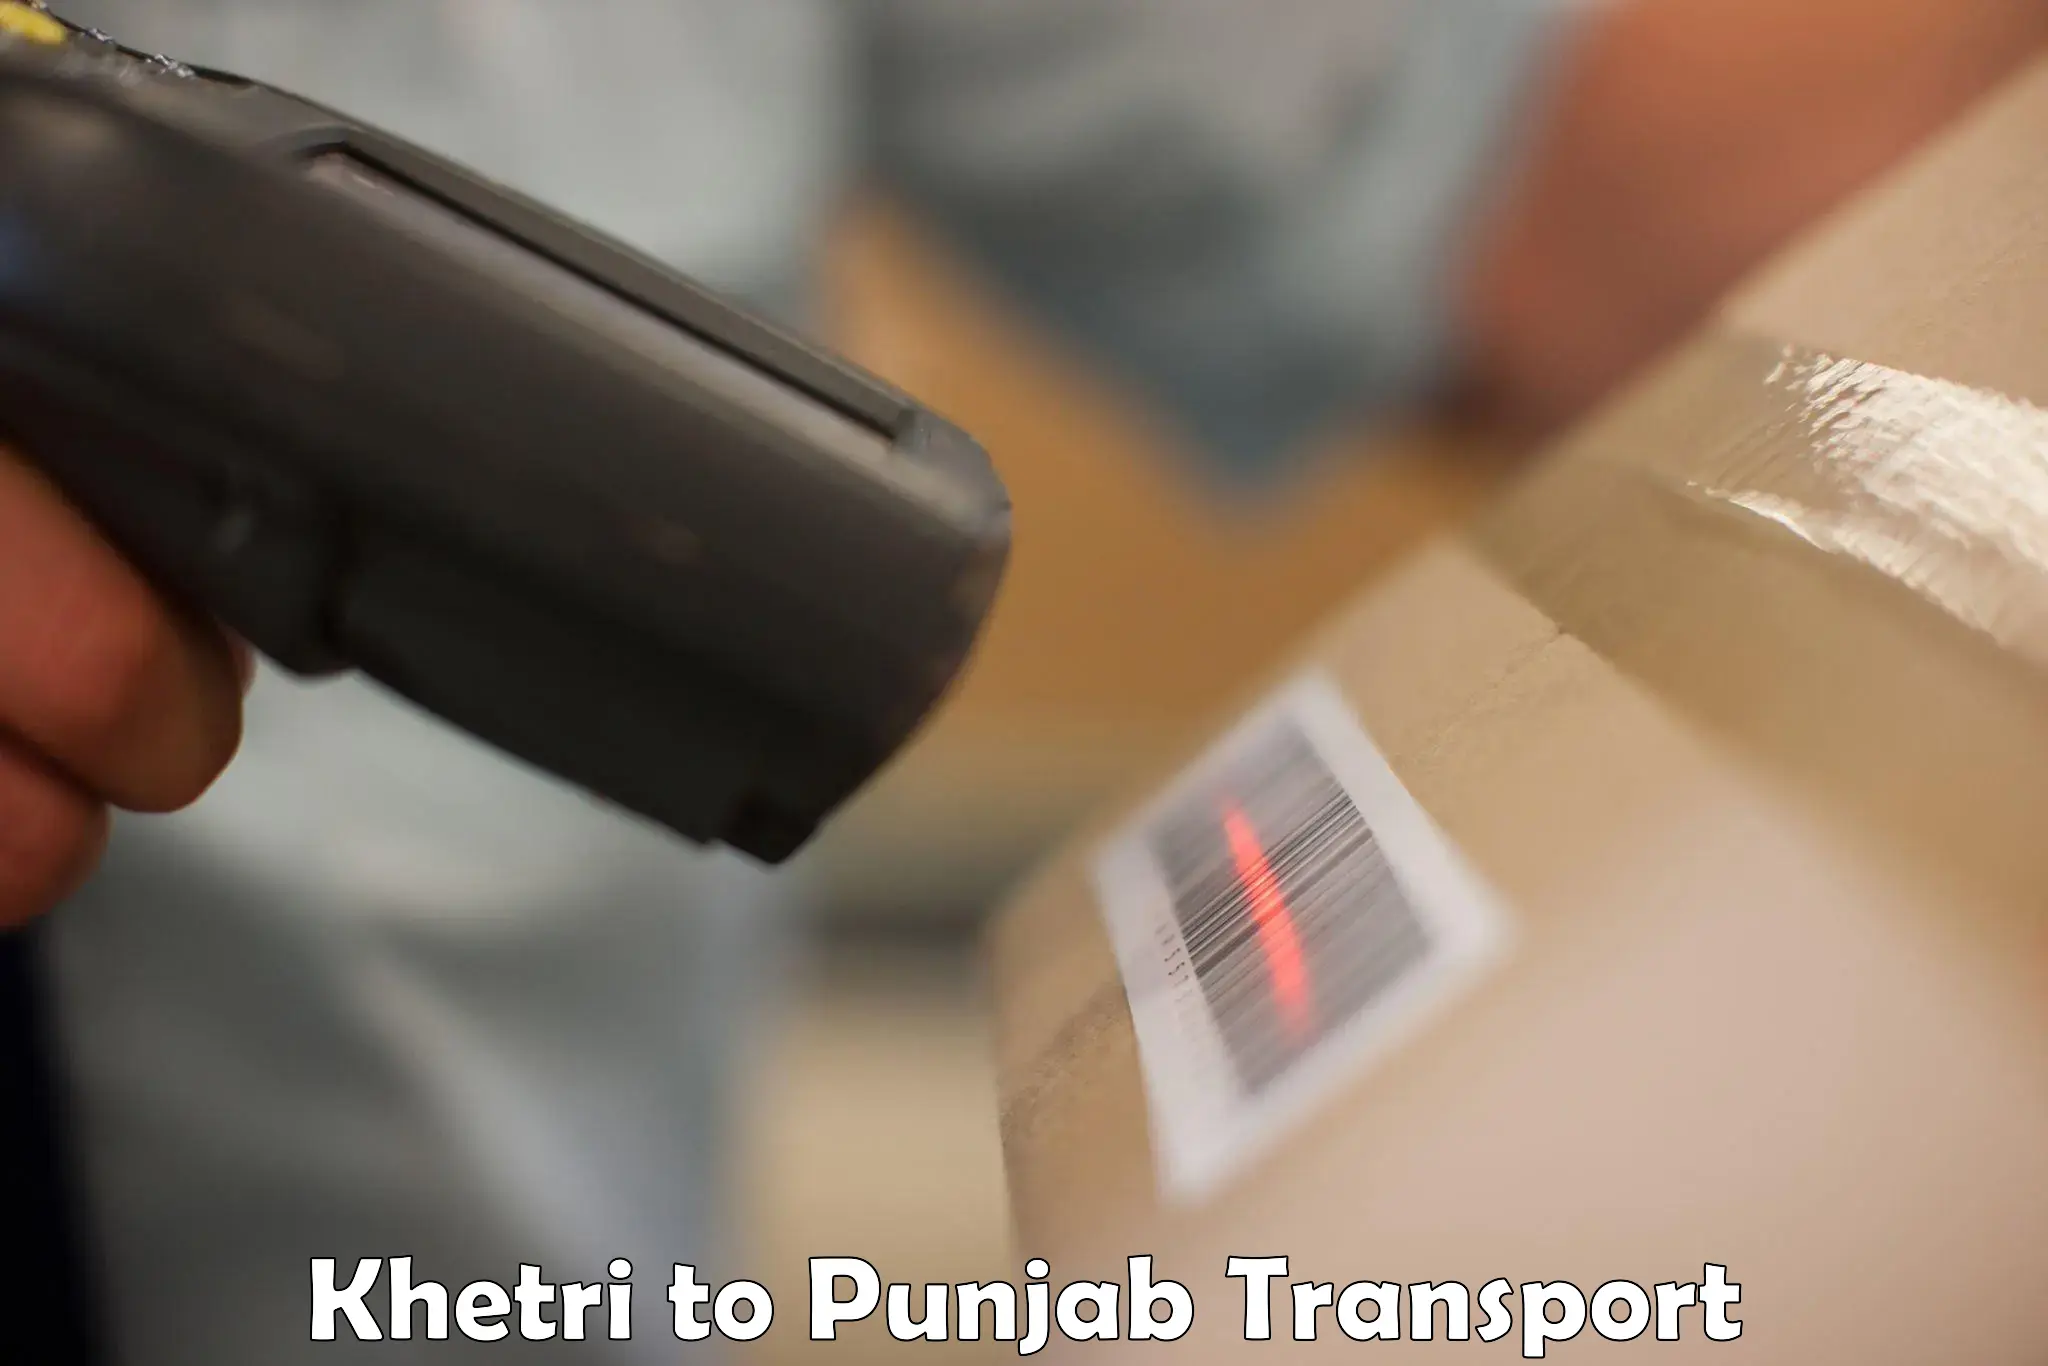 Air freight transport services in Khetri to Ludhiana